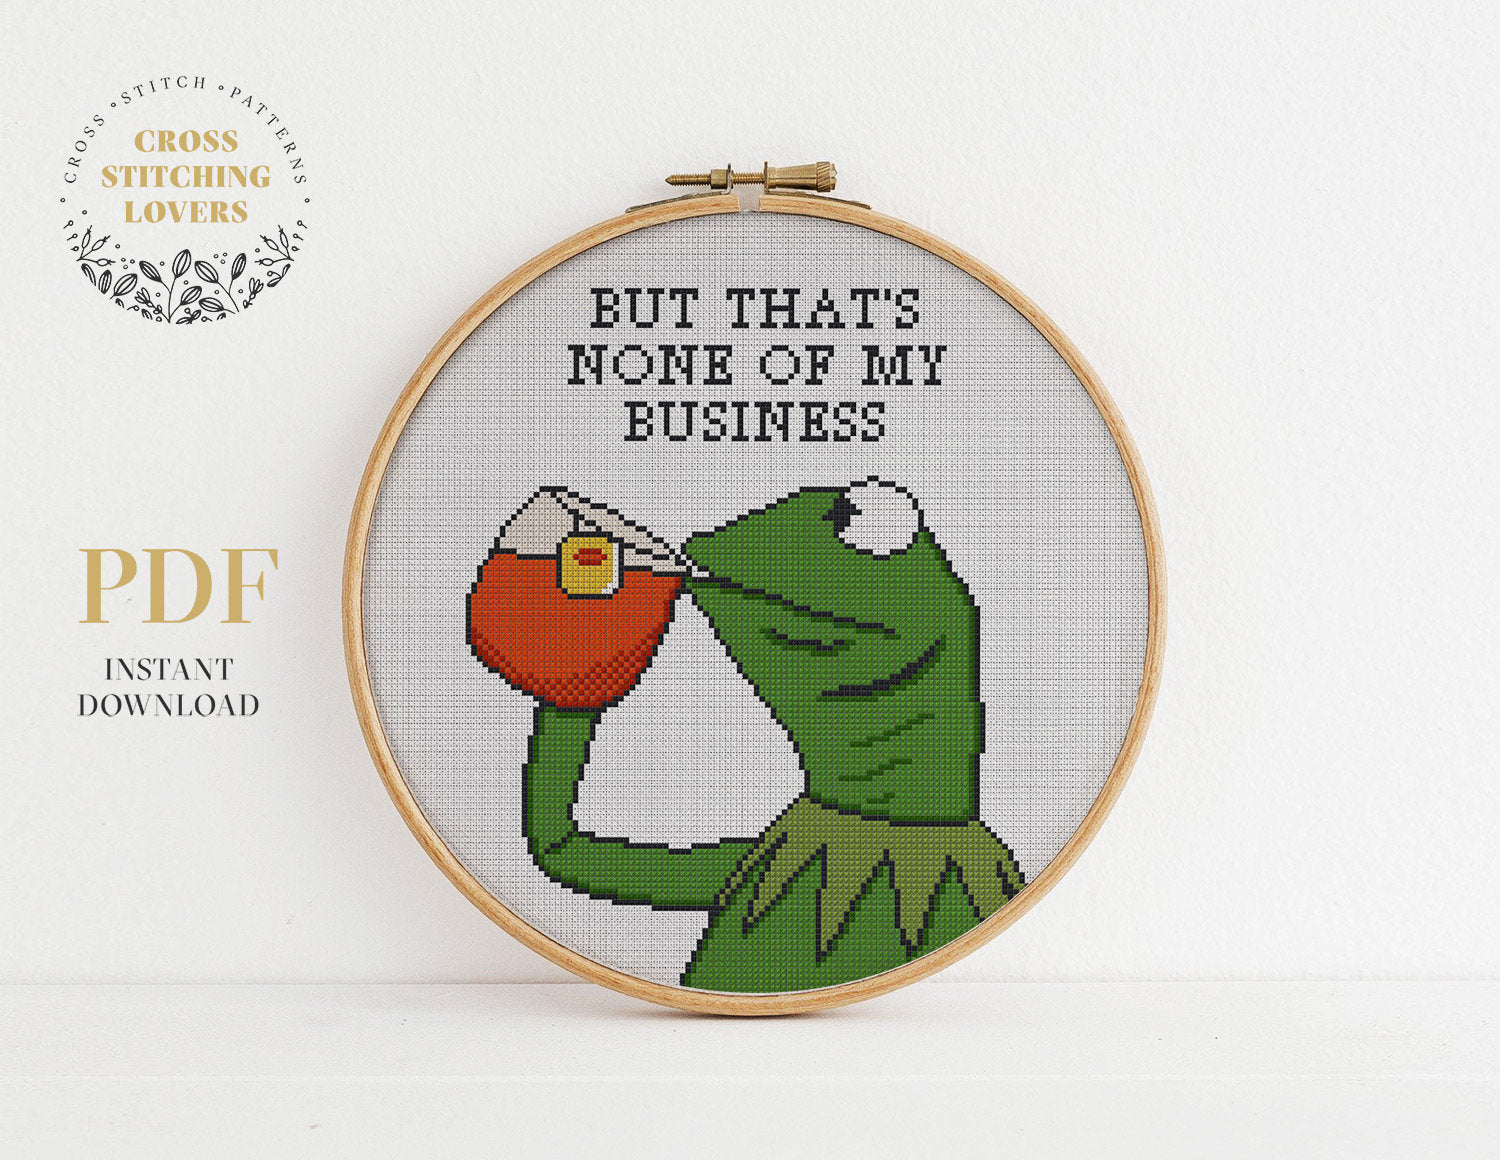 Kermit meme "But that's none of my business" - Cross stitch pattern